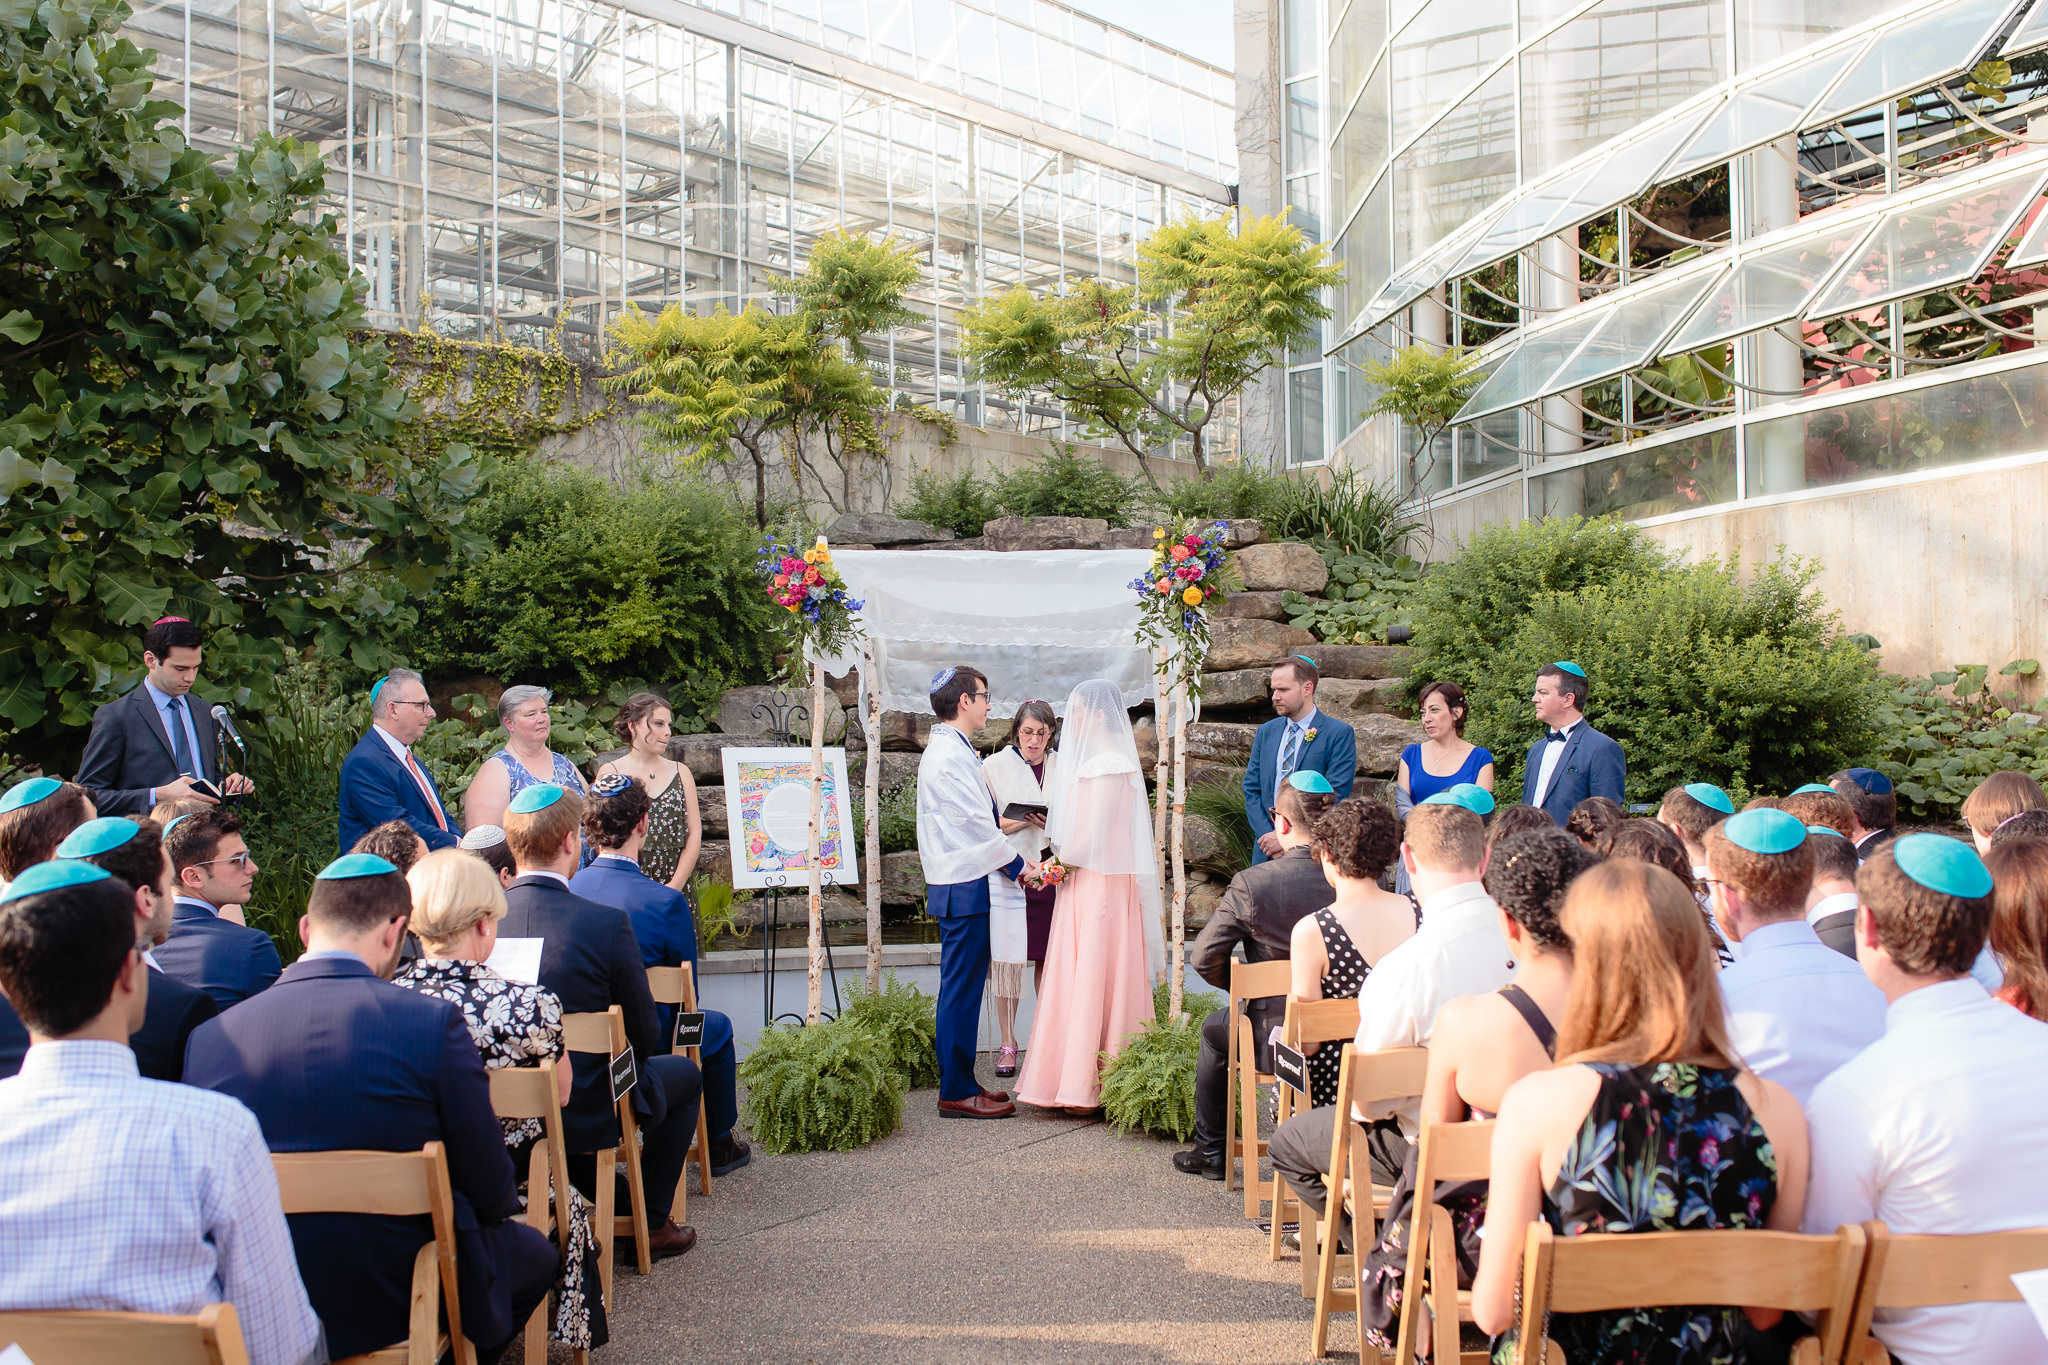 Outdoor Jewish wedding ceremony at Phipps Conservatory